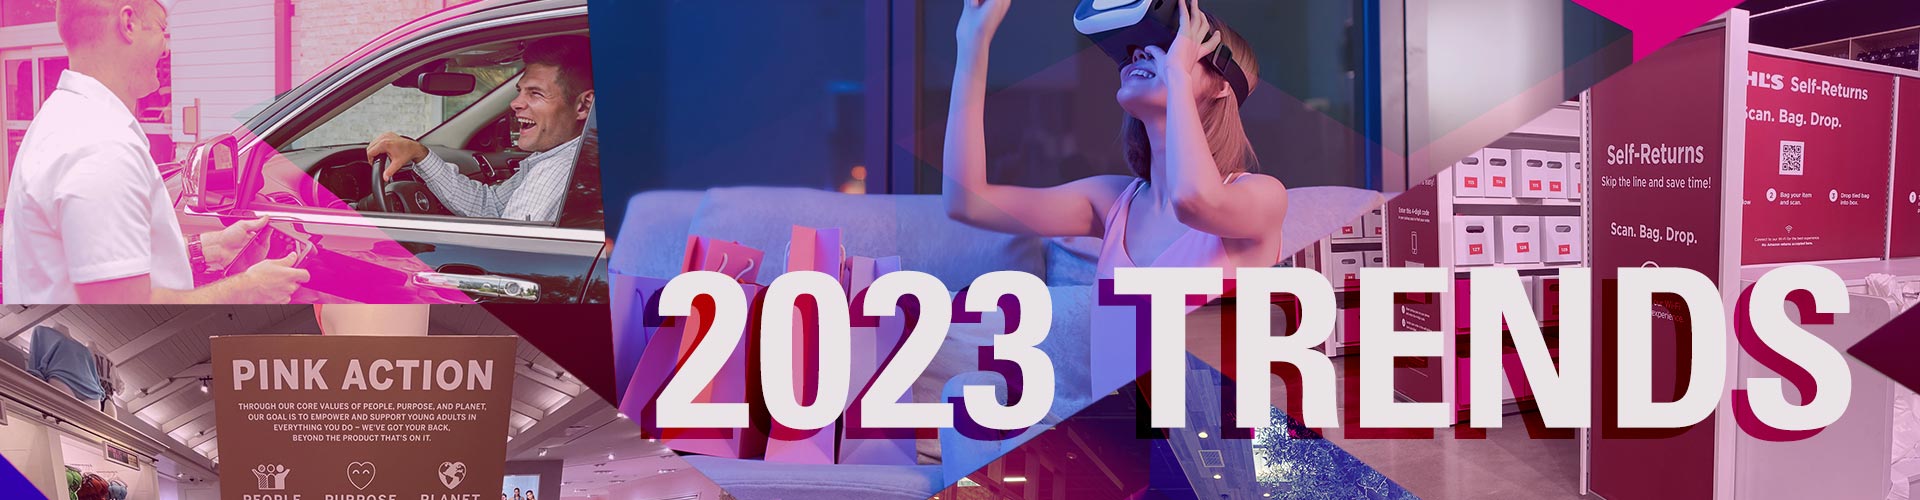 2023 Trends blog banner featuring collage of shoppers and new trends such as metaverse, drive thru shopping, and innovative self-checkouts